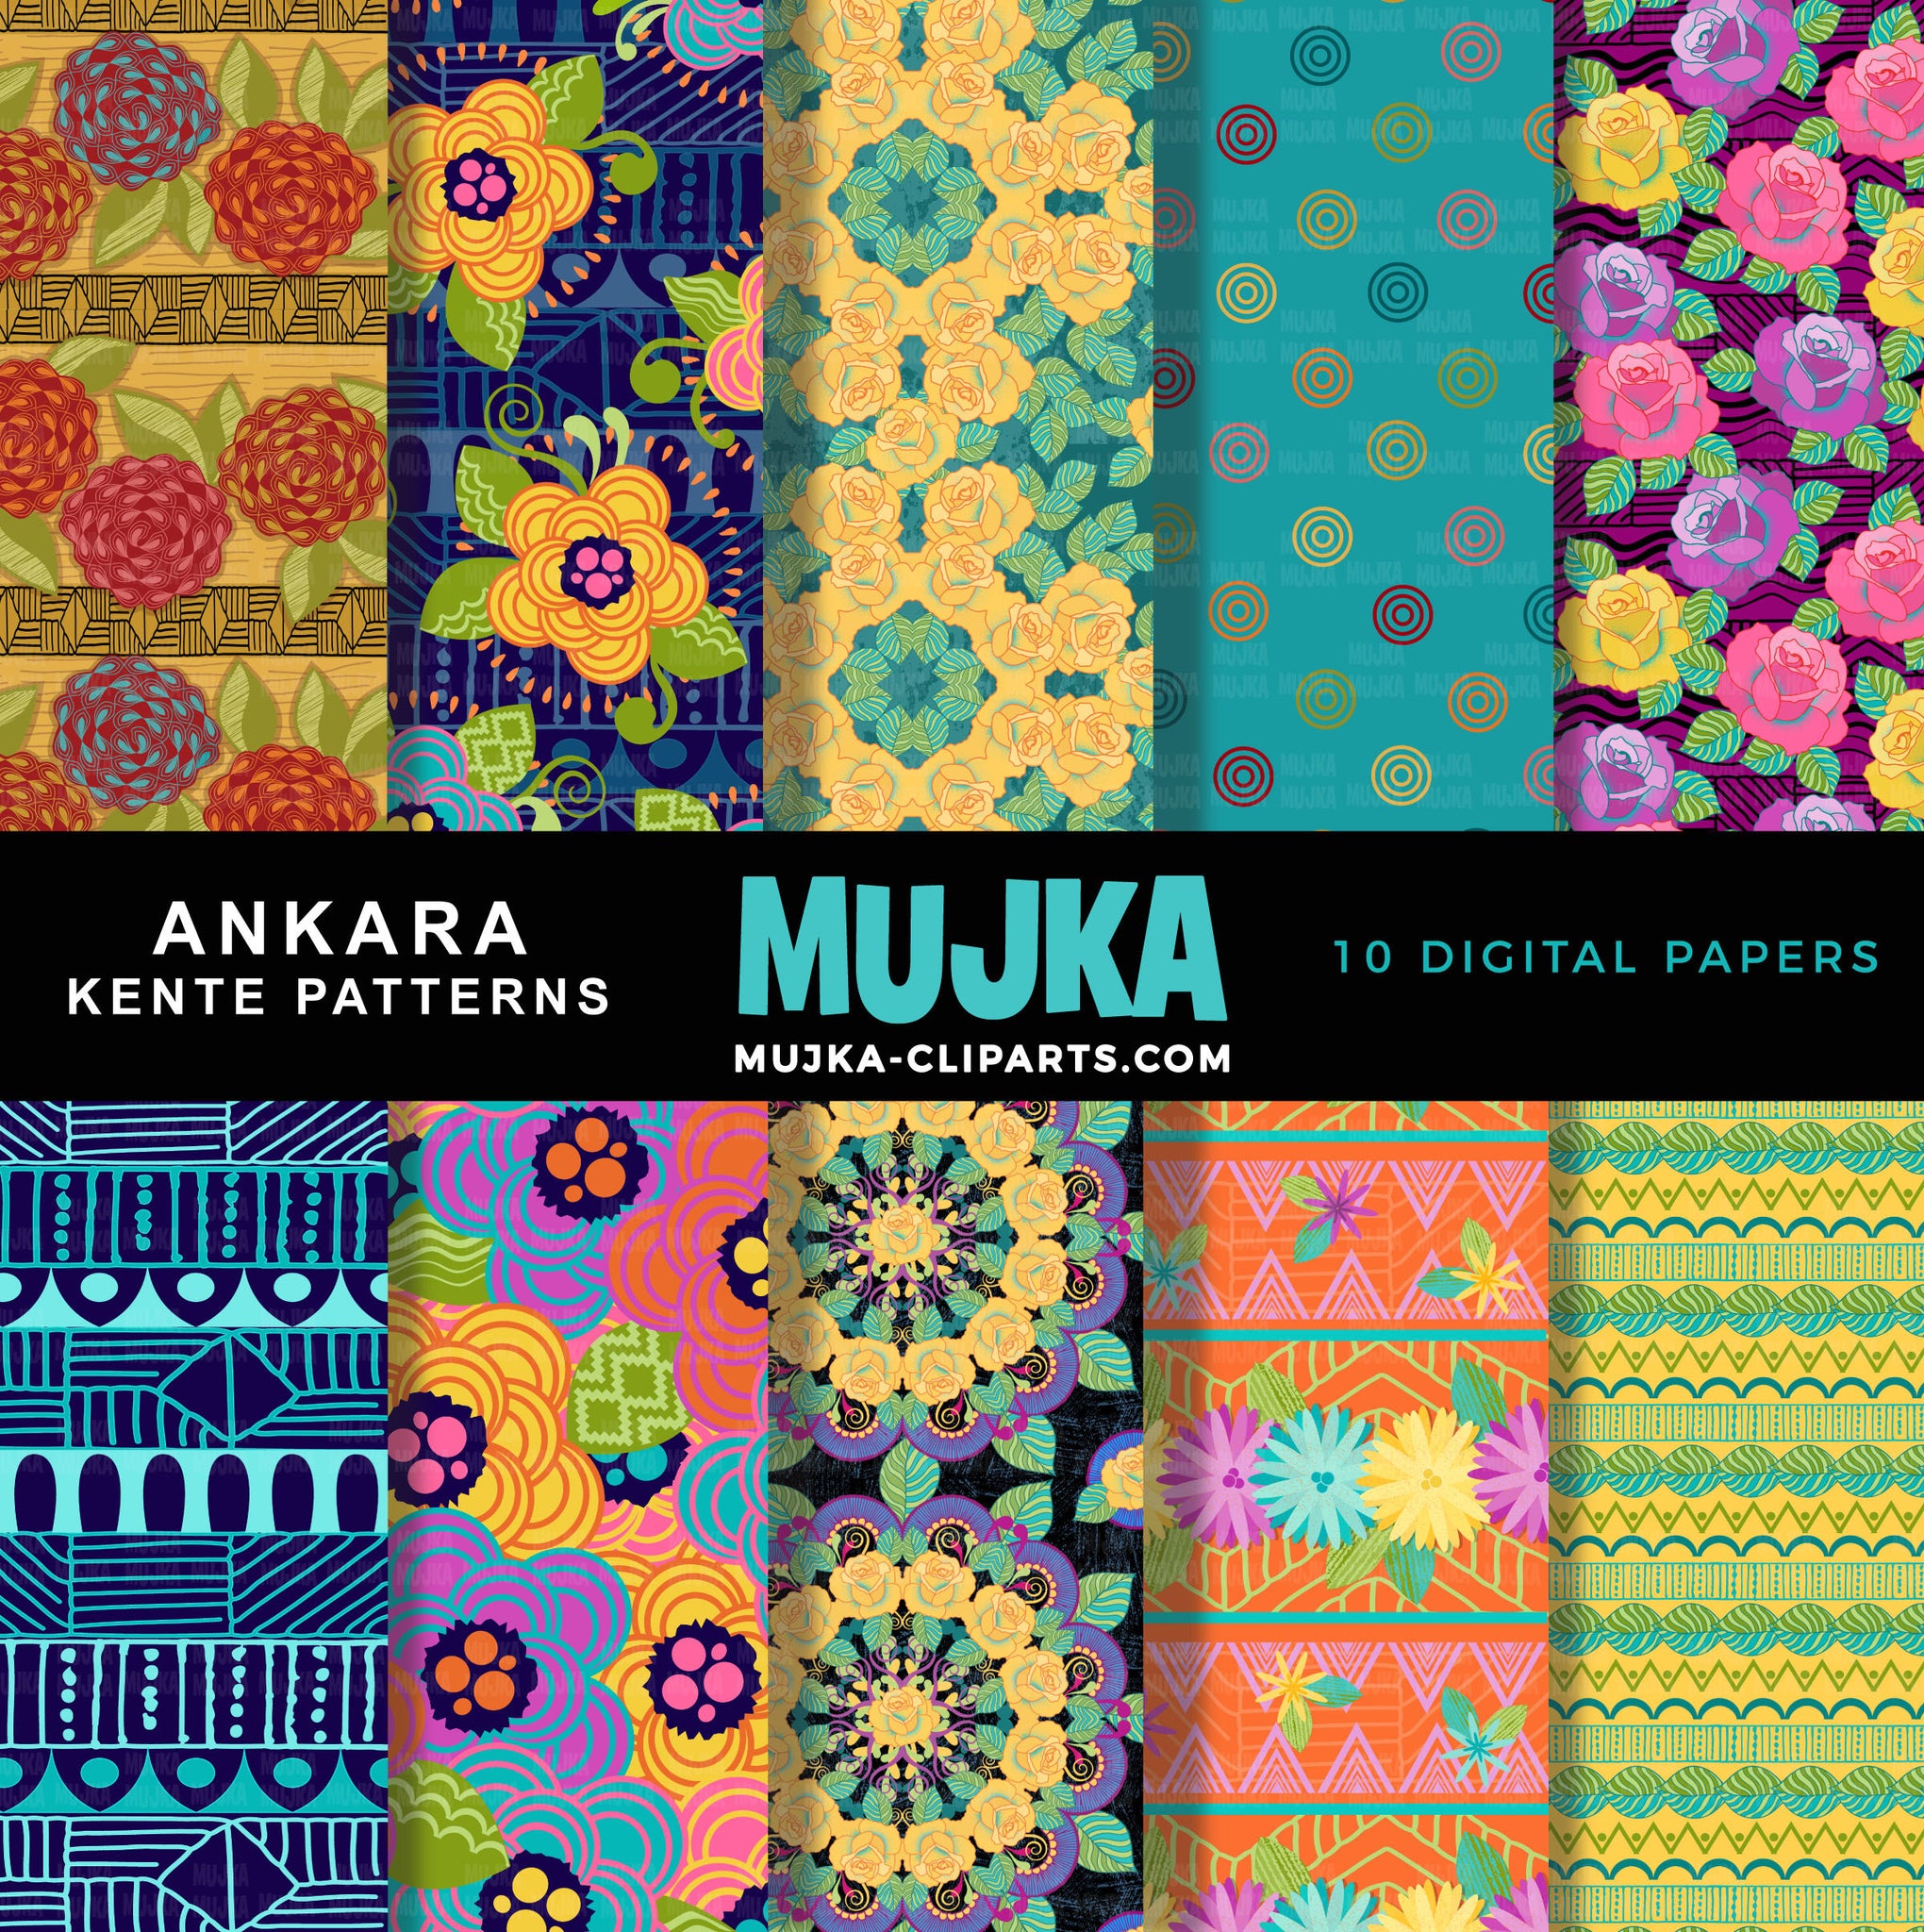 African digital papers, African patterns, Ankara Kente wax patterns, seamless digital patterns, floral texture, tribal backgrounds